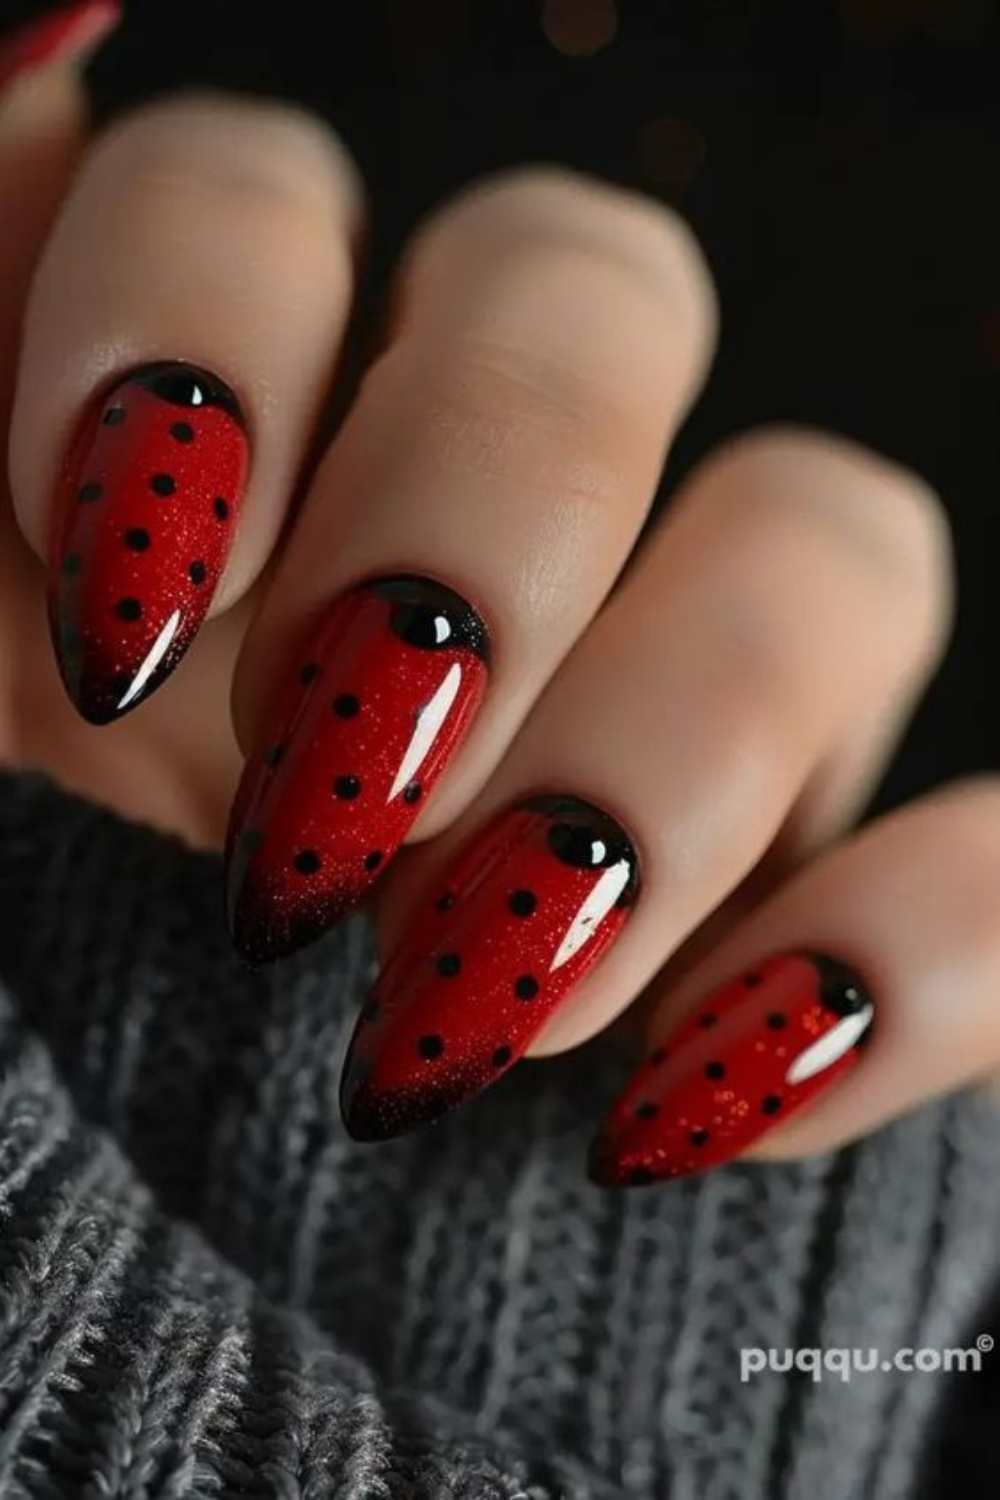 The Ultimate List of Pretty Polka Dot Nails To Fuel Your Inspo!